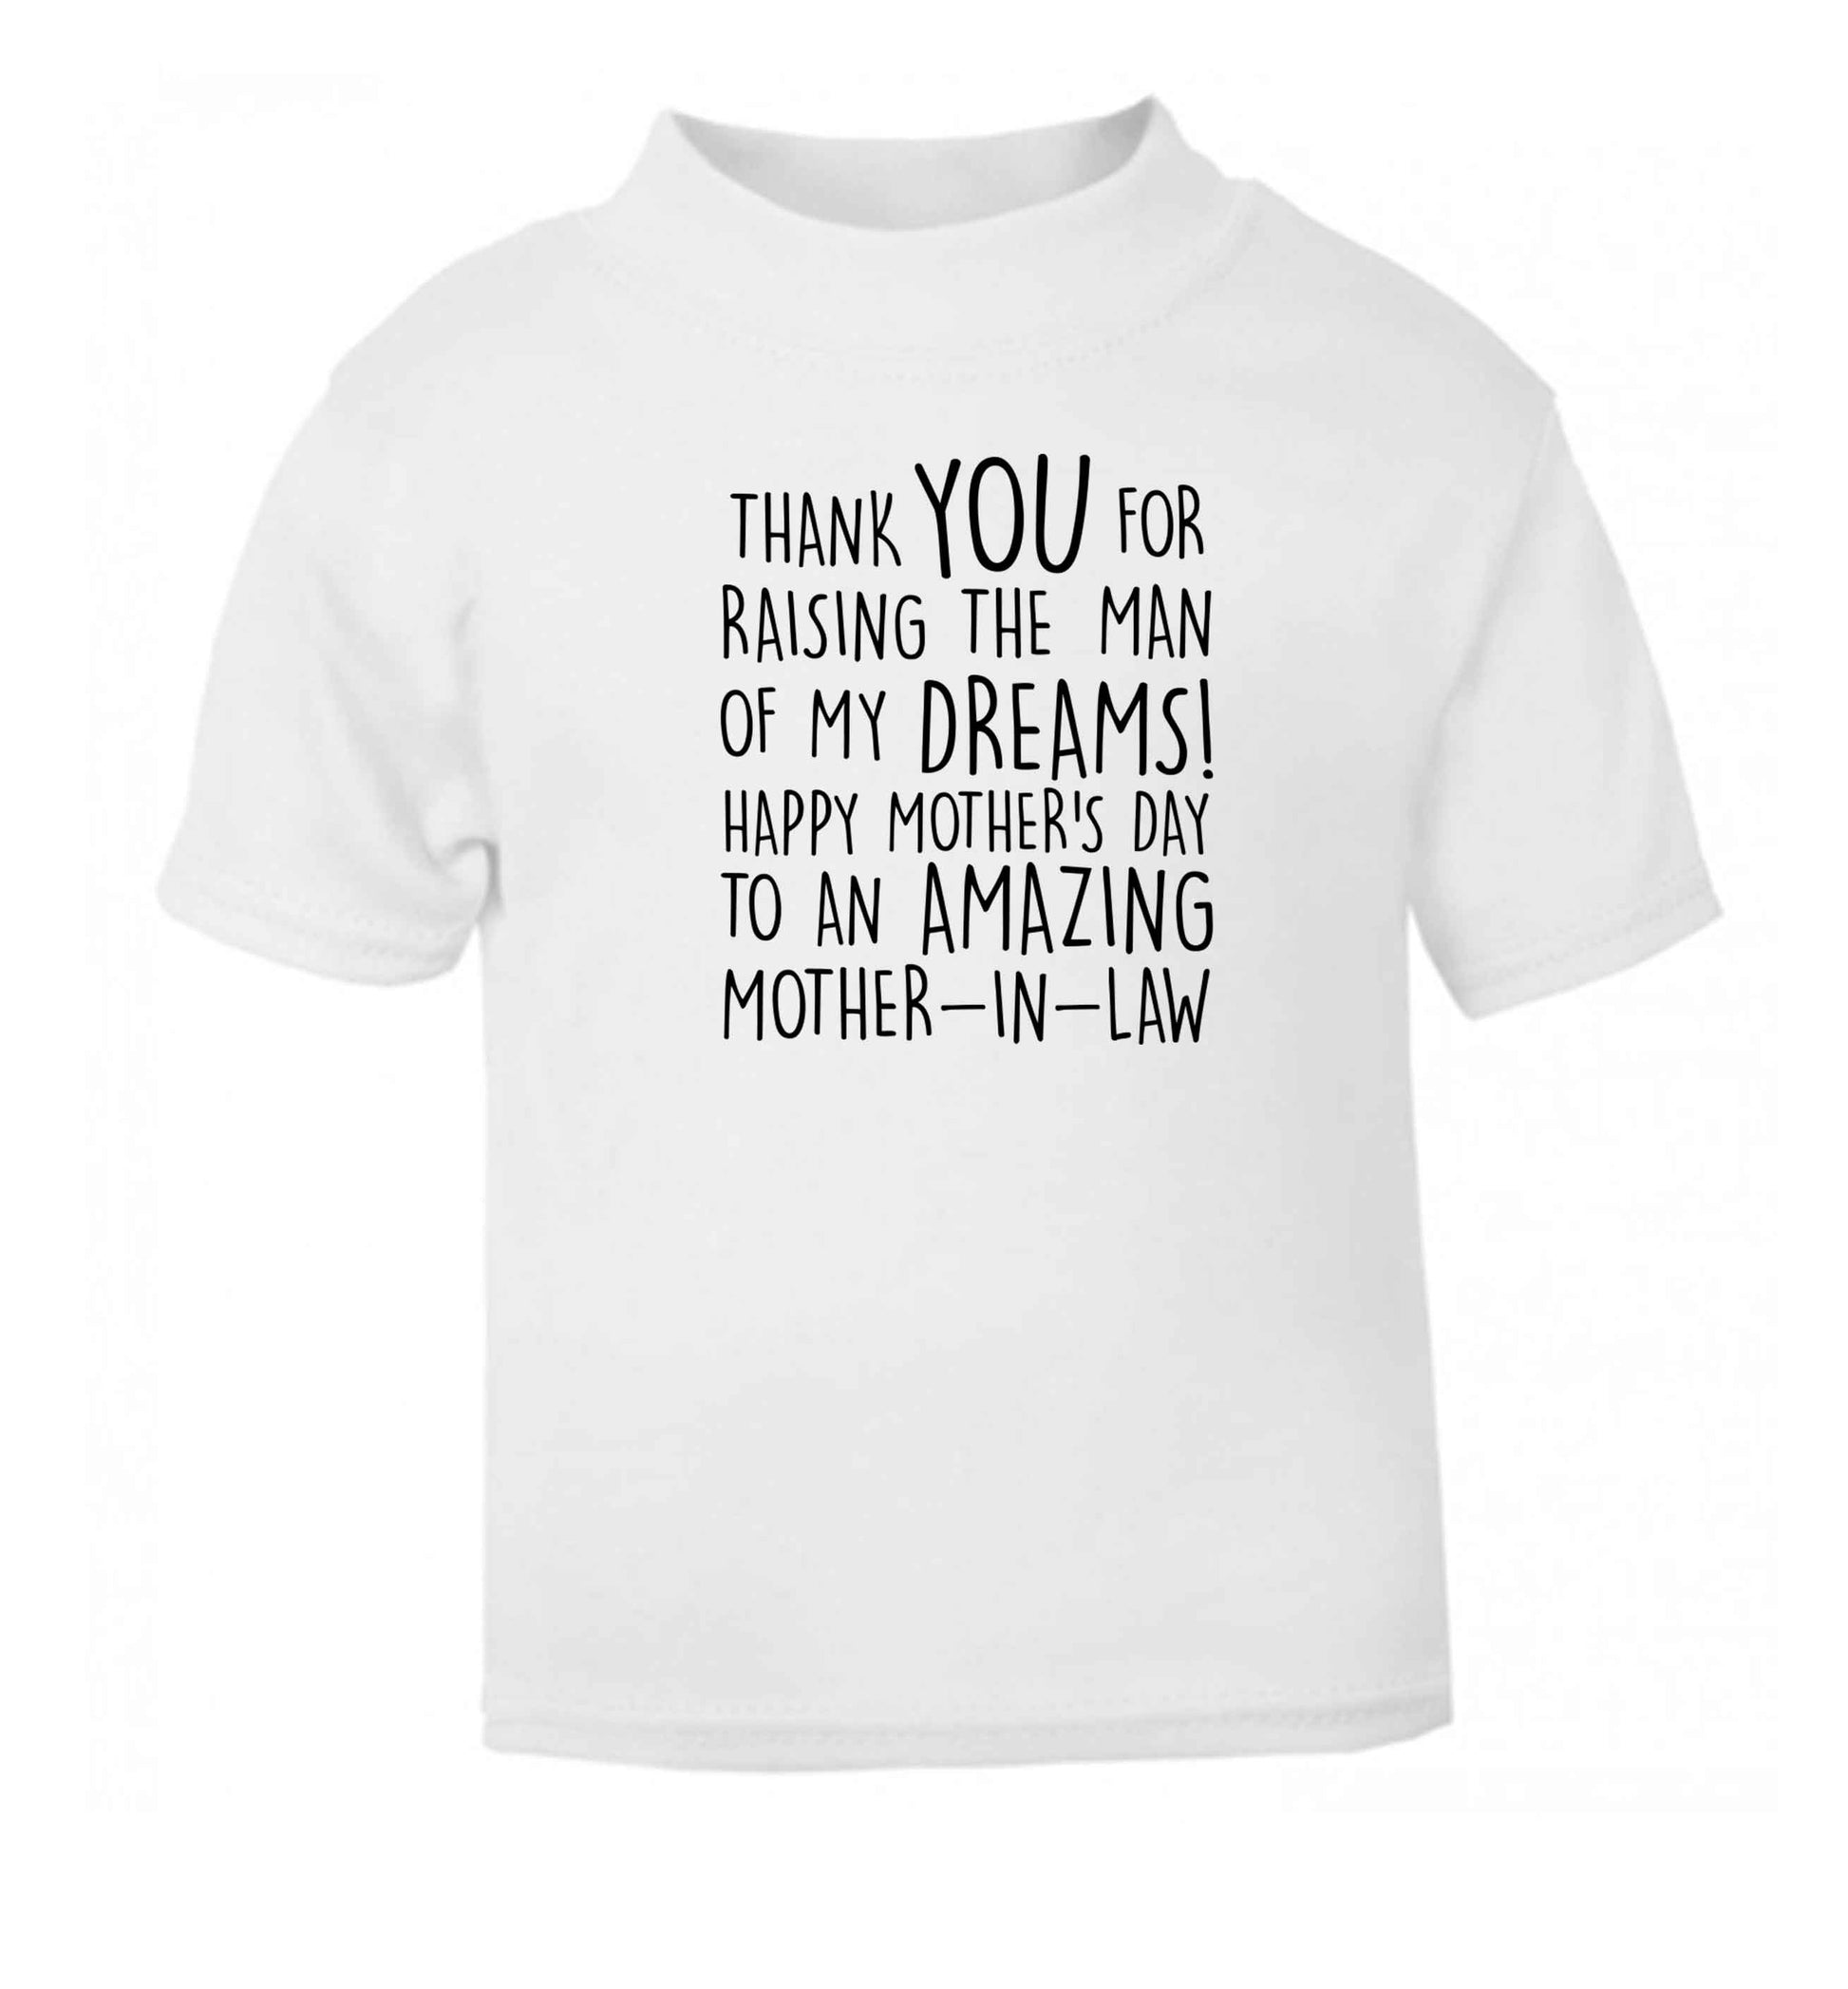 Raising the man of my dreams mother's day mother-in-law white baby toddler Tshirt 2 Years